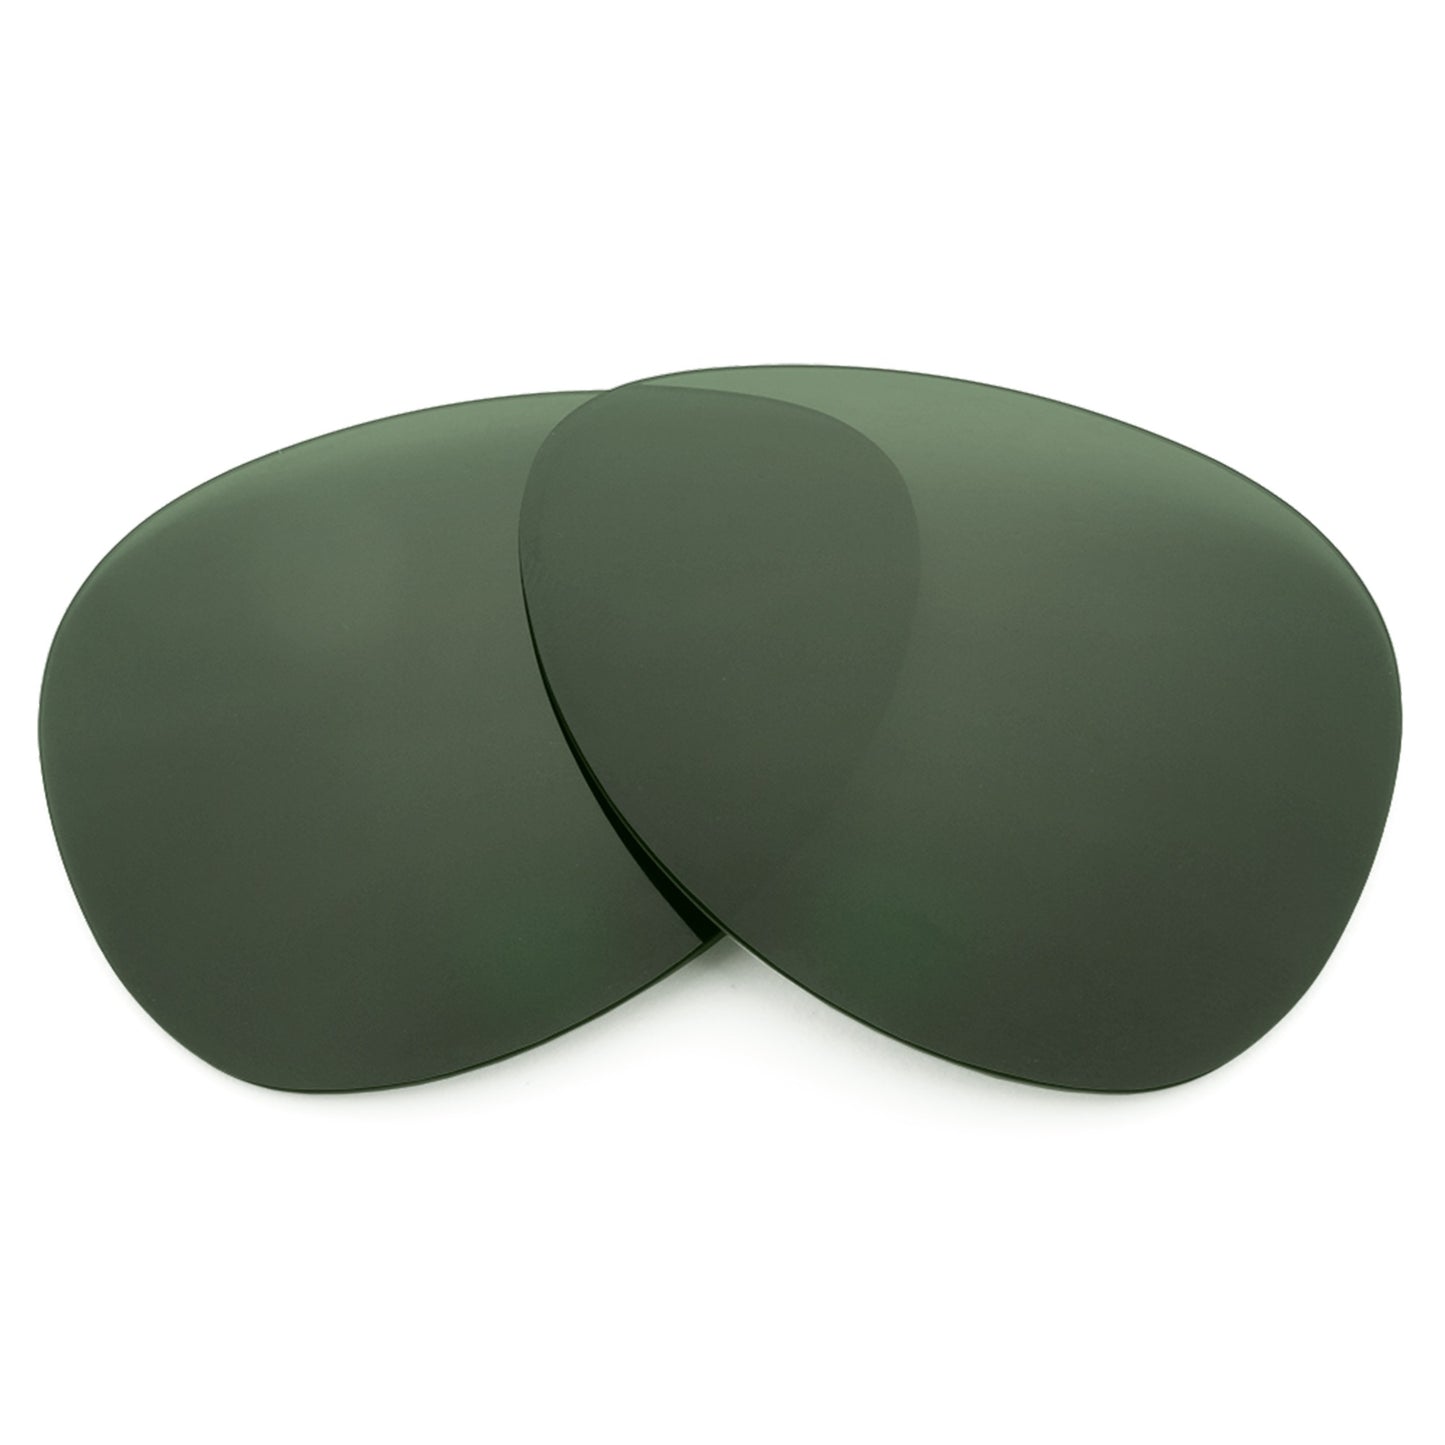 Revant replacement lenses for Ray-Ban Aviator Carbon Fibre RB8307 58mm Non-Polarized Gray Green